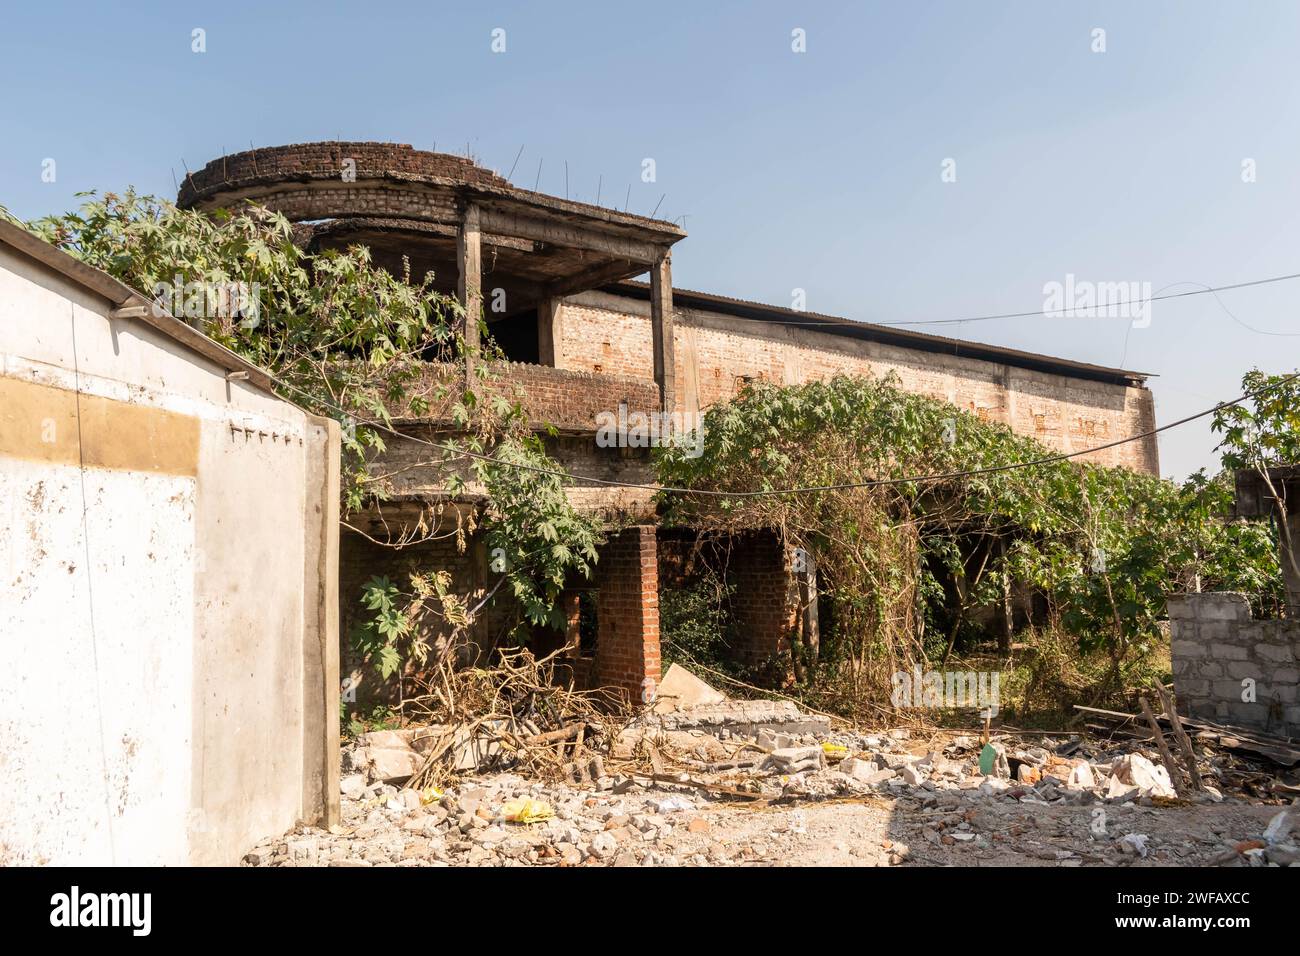 Belur, Karnataka, India - January 9 2023: An old derelict overgrown ruin of a row house in the town. Stock Photo